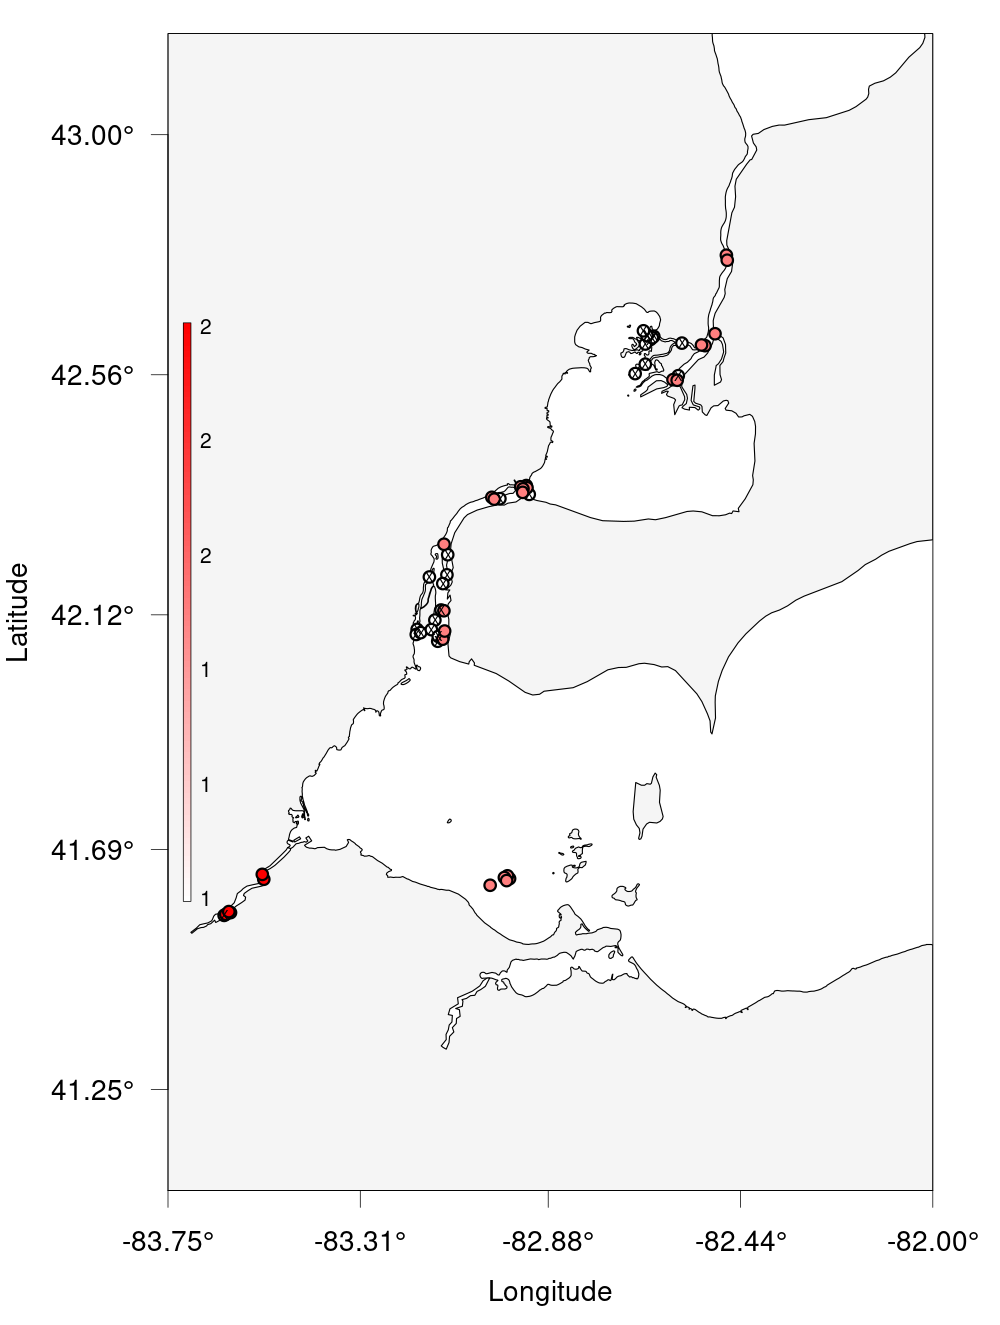 Bubble plot for detections on Lake Erie Stations